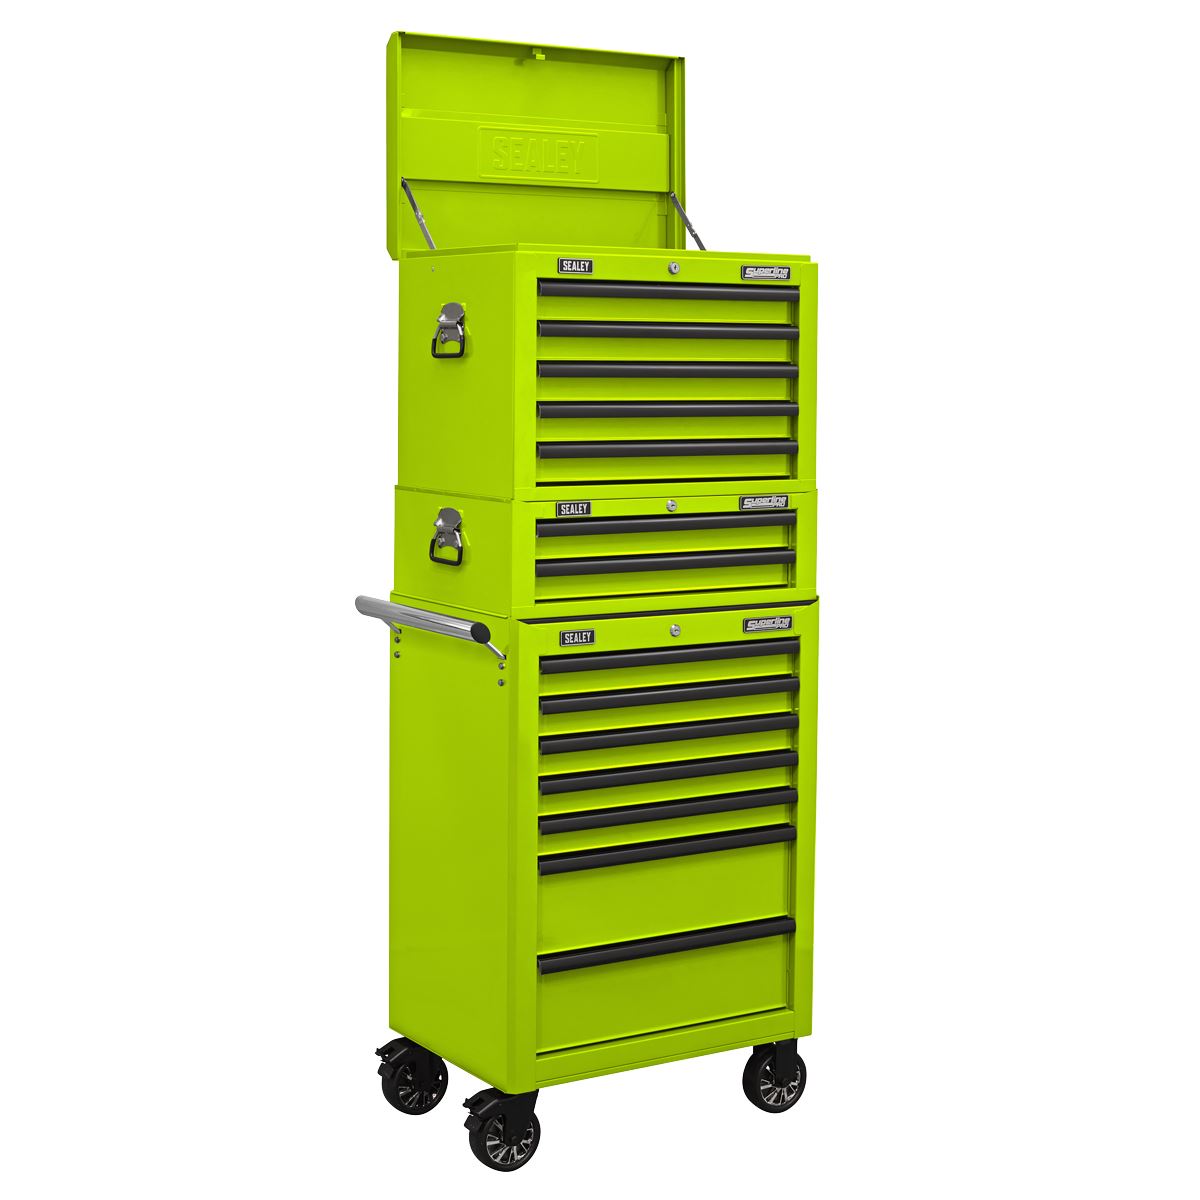 Sealey Superline Pro Topchest, Mid-Box Tool Chest & Rollcab Combination 14 Drawer with Ball-Bearing Slides - Green